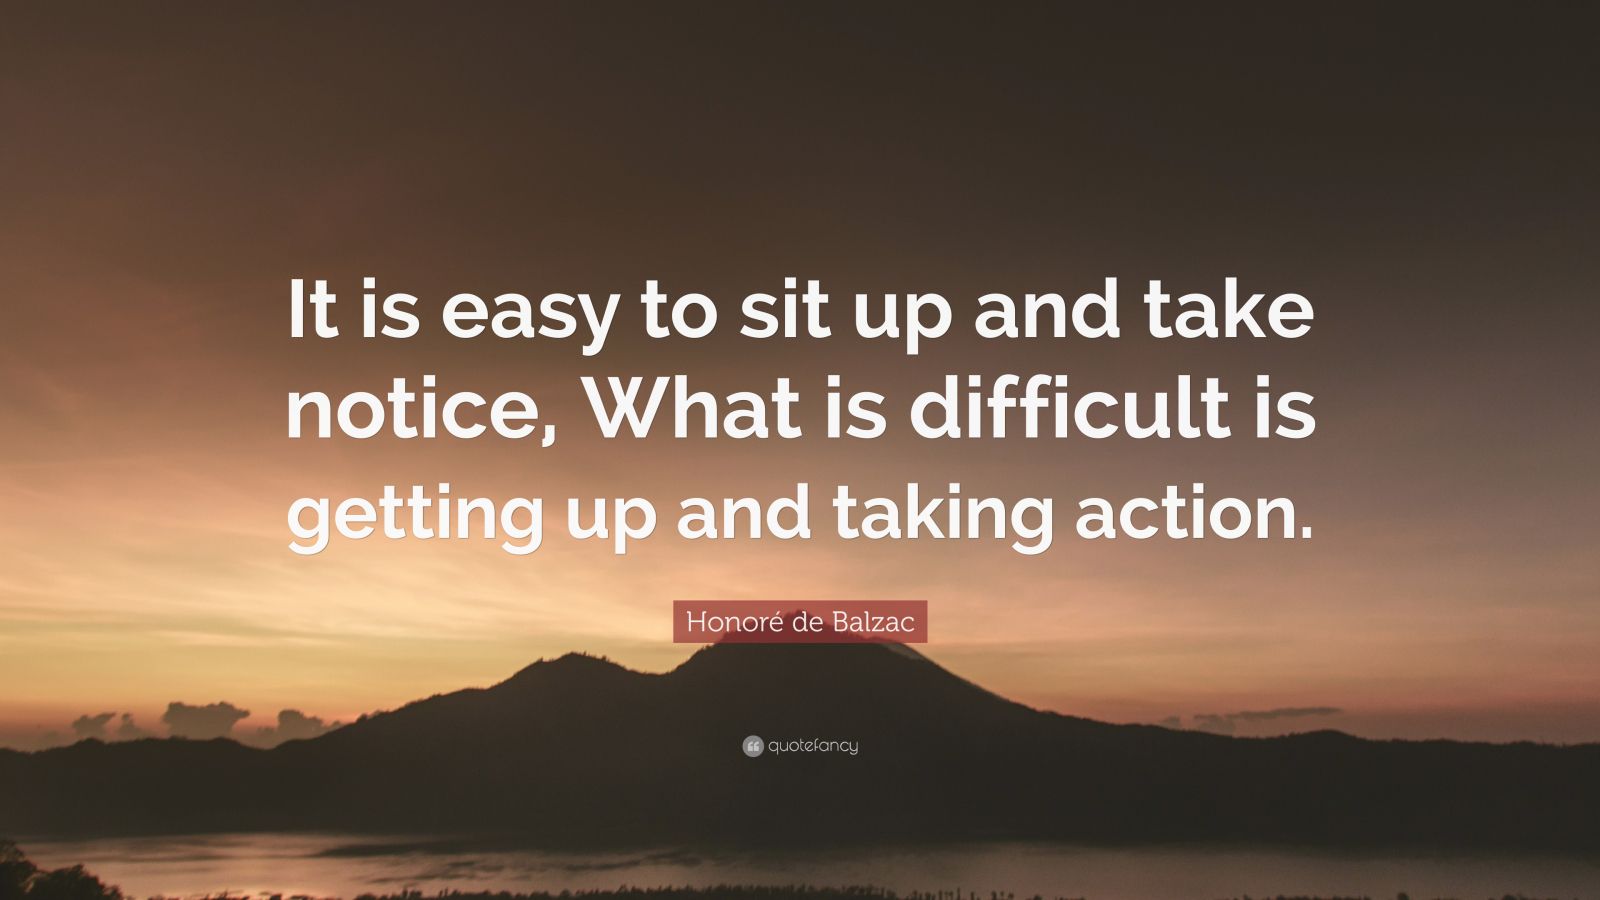 Honoré de Balzac Quote: “It is easy to sit up and take notice, What is difficult is ...1600 x 900